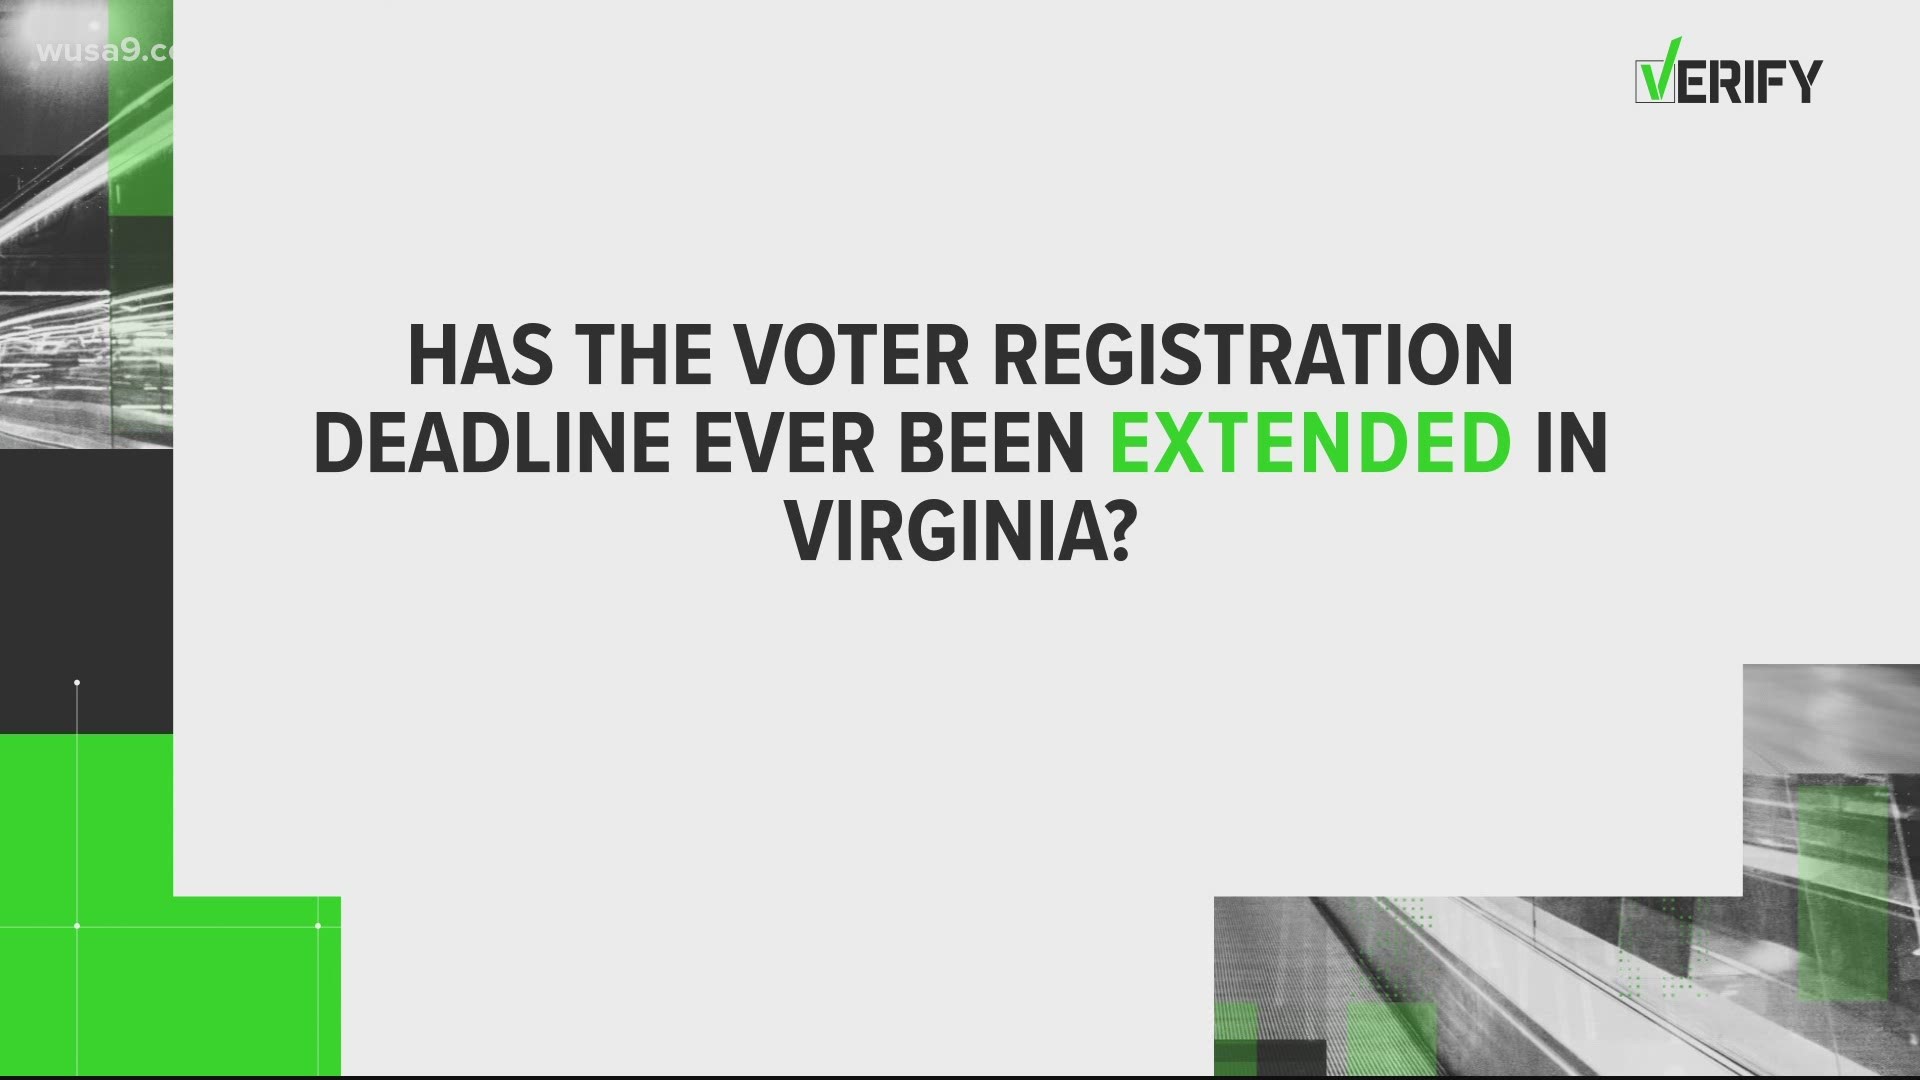 On Tuesday, An accidentally cut cable caused the entire Virginia voter registration system to go down on the last day to register to vote before election day.